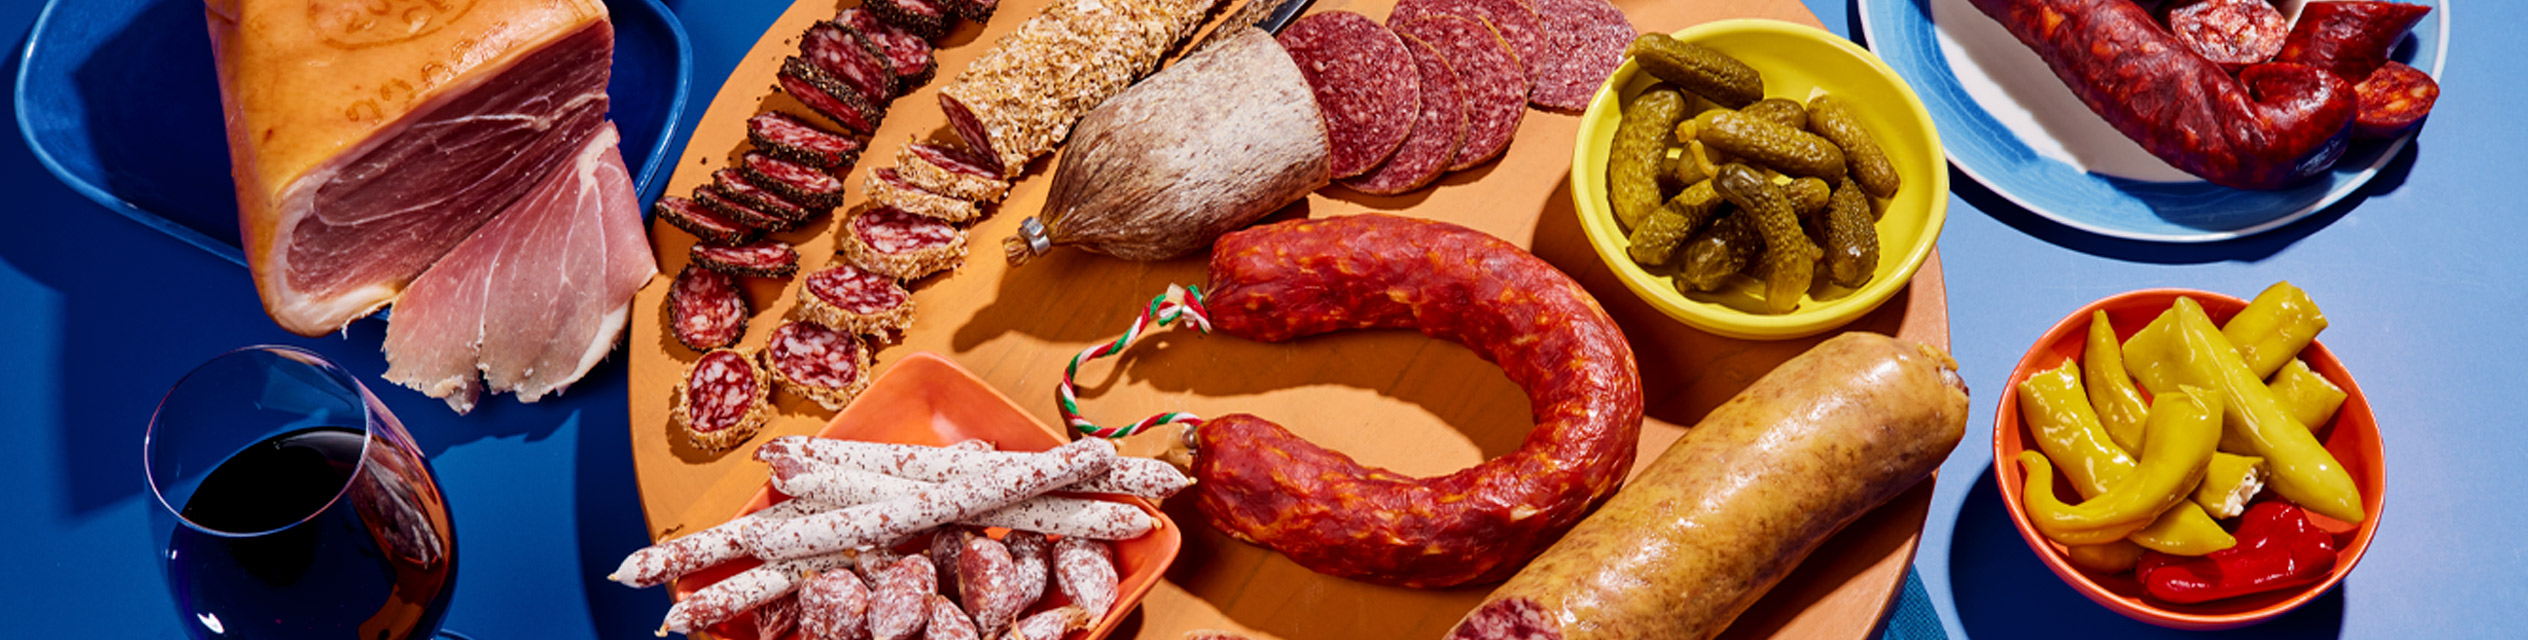 Discover Our Charcuterie Range